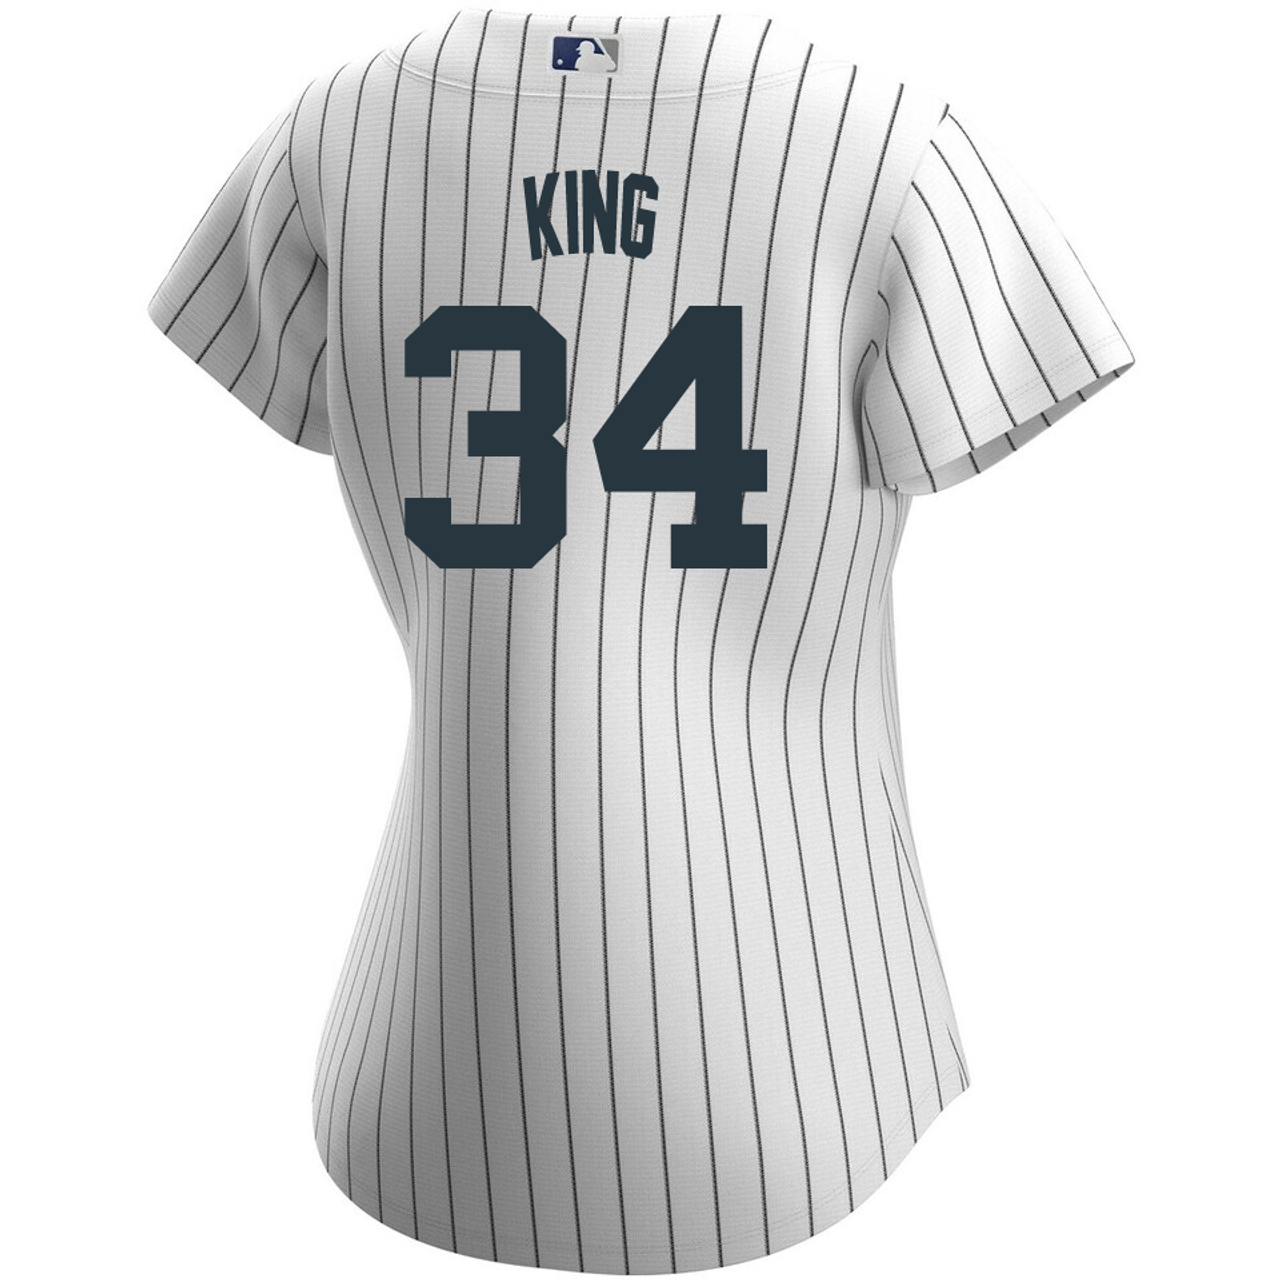 Michael King Ladies Jersey - NY Yankees Replica Womens Home Jersey